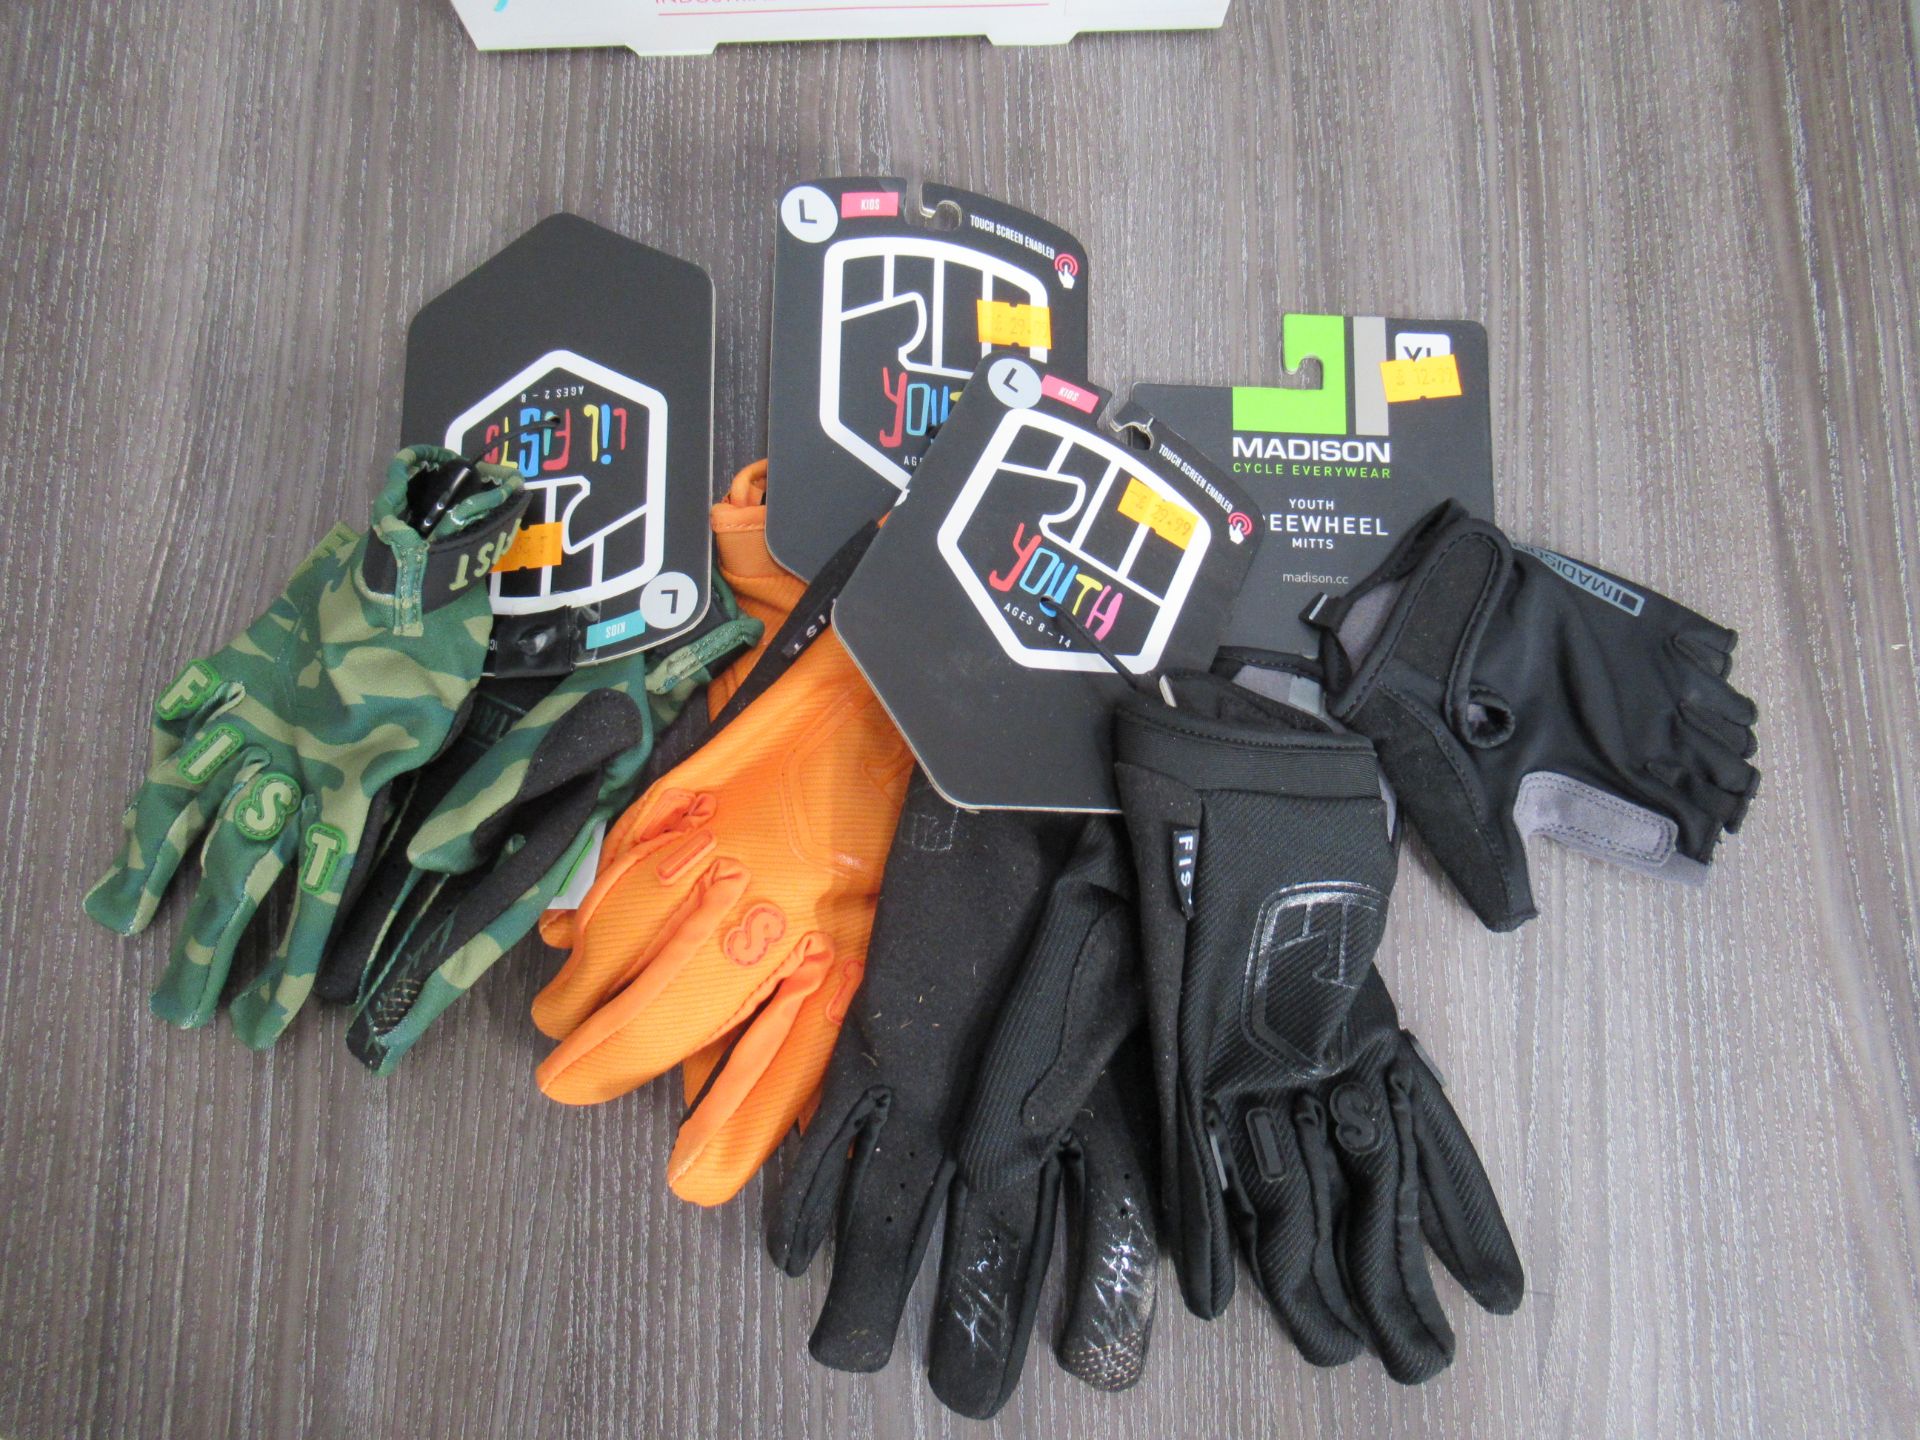 7 x pairs of Children's L Gloves - 6 x FIST (RRP£29.99 each) and 1 x Madison (£12.99) - Image 2 of 2